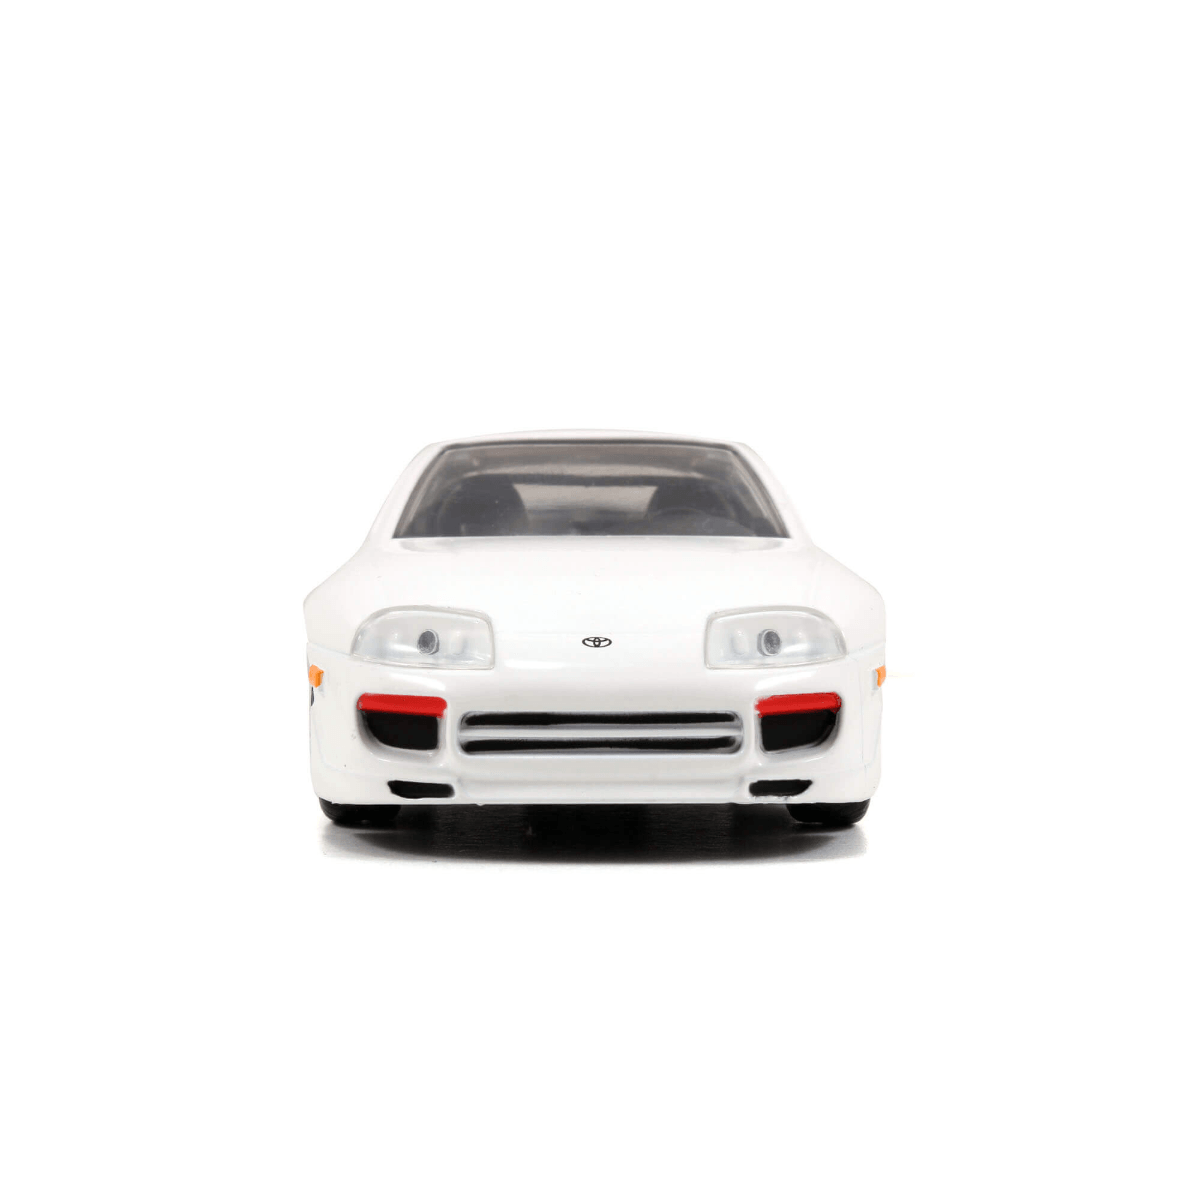 Fast and Furious - 1995 Toyota Supra White 1:32 Scale Hollywood Ride Jada Toys Titan Pop Culture